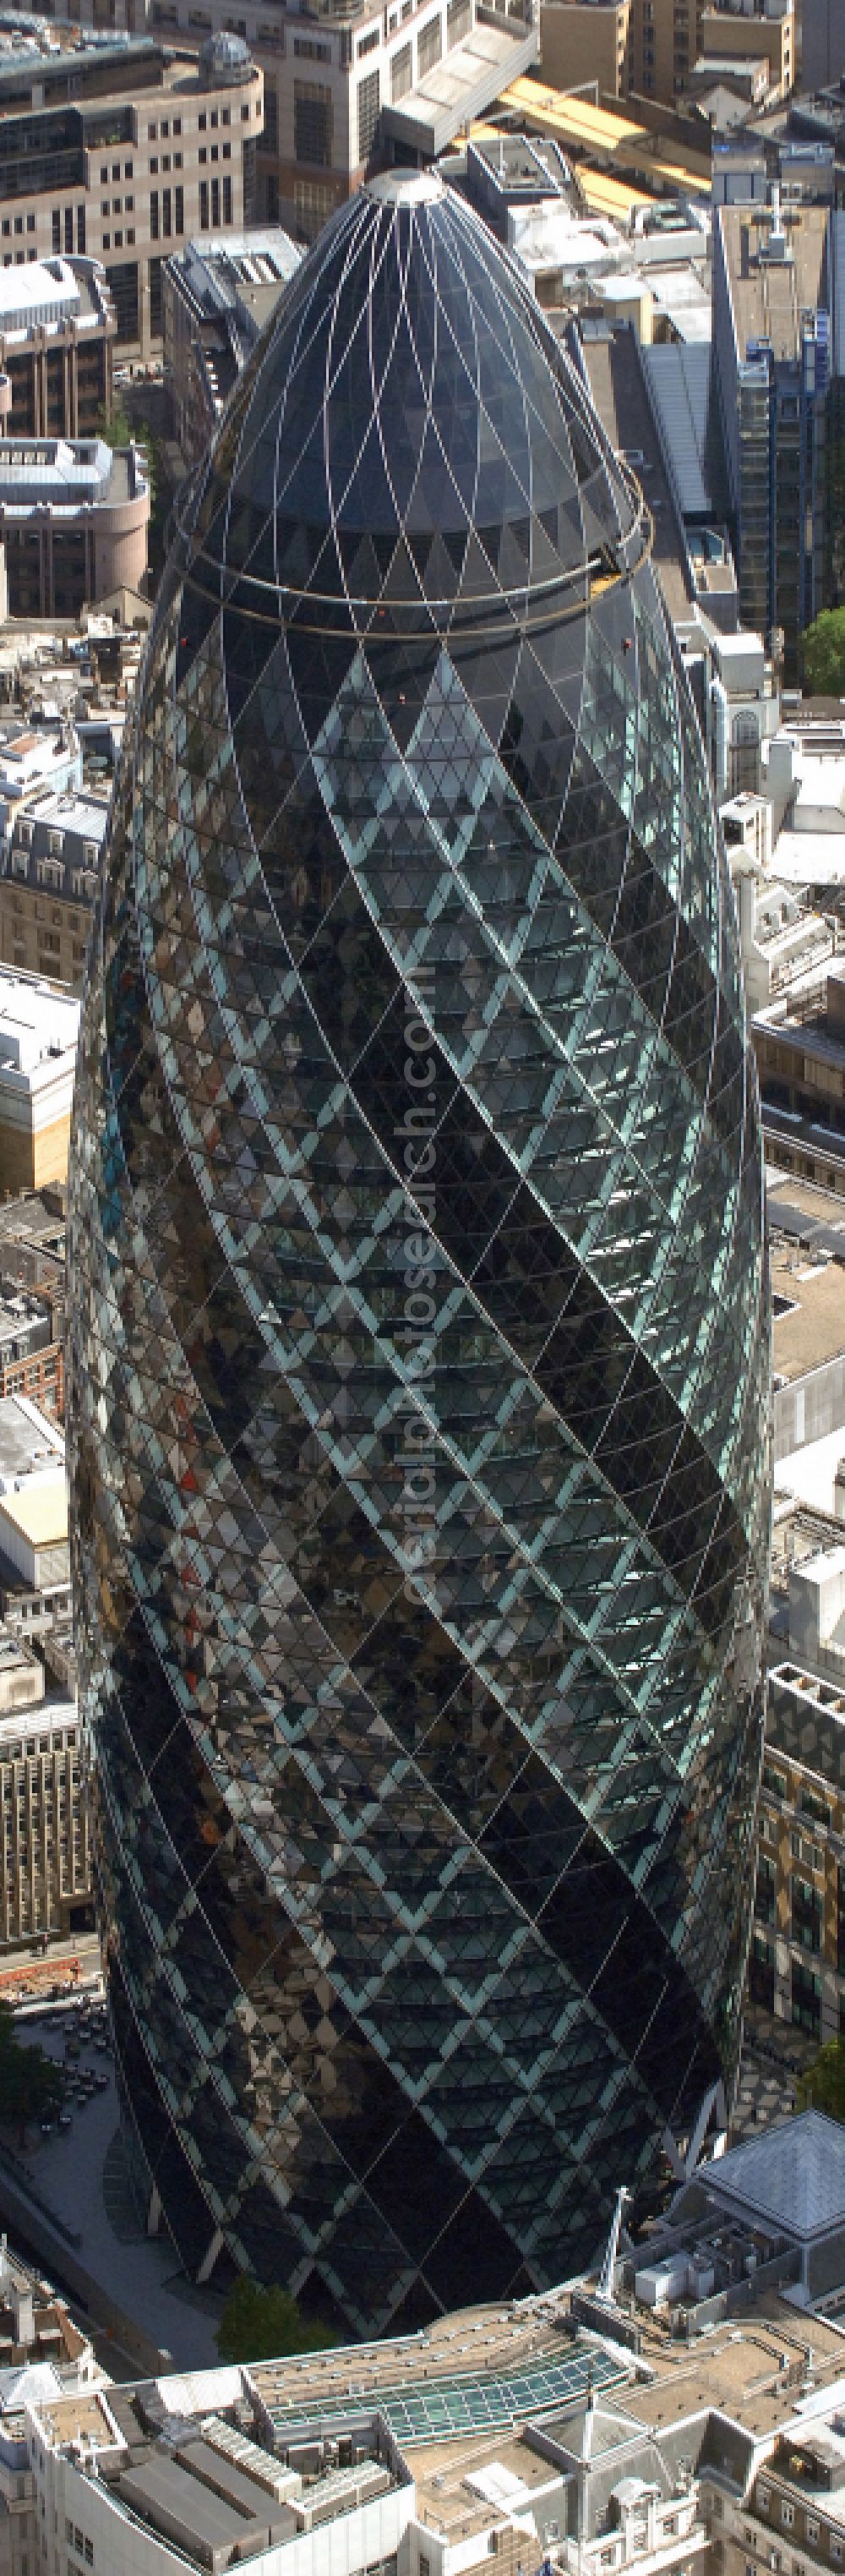 London from the bird's eye view: Office and corporate management high-rise building The Gherkin on street Saint Mary Axe in London in England, United Kingdom